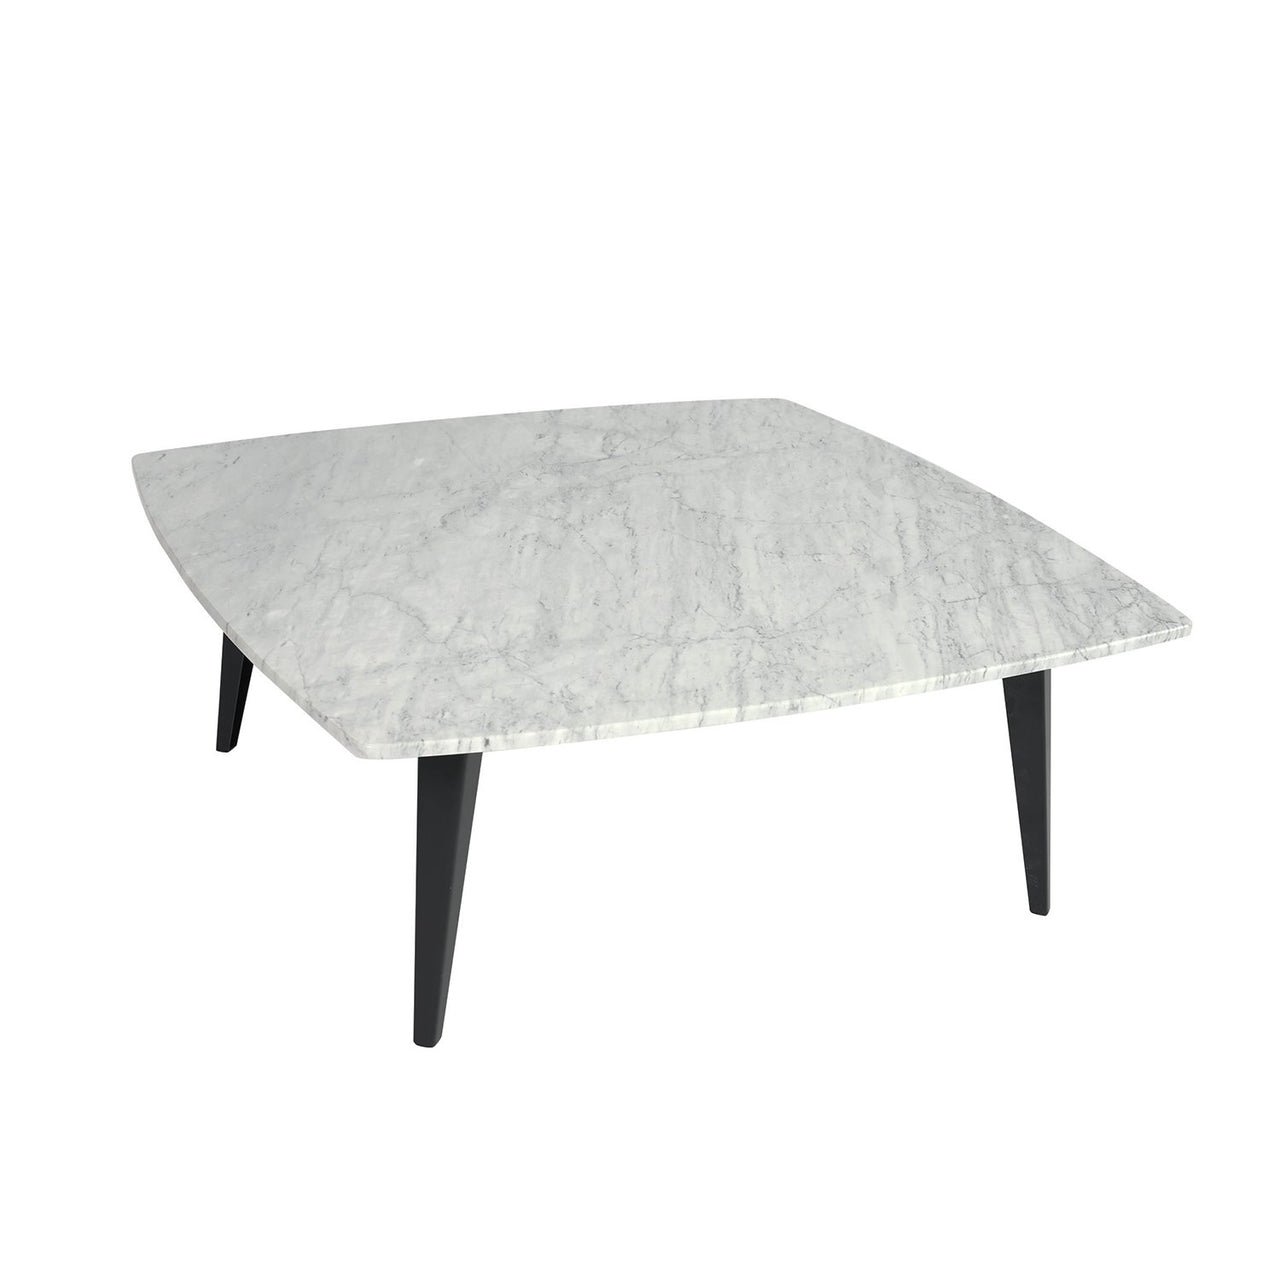 Prata 36" Square Italian Carrara White Marble Coffee Table with Metal Legs Coffee Table The Bianco Collection 